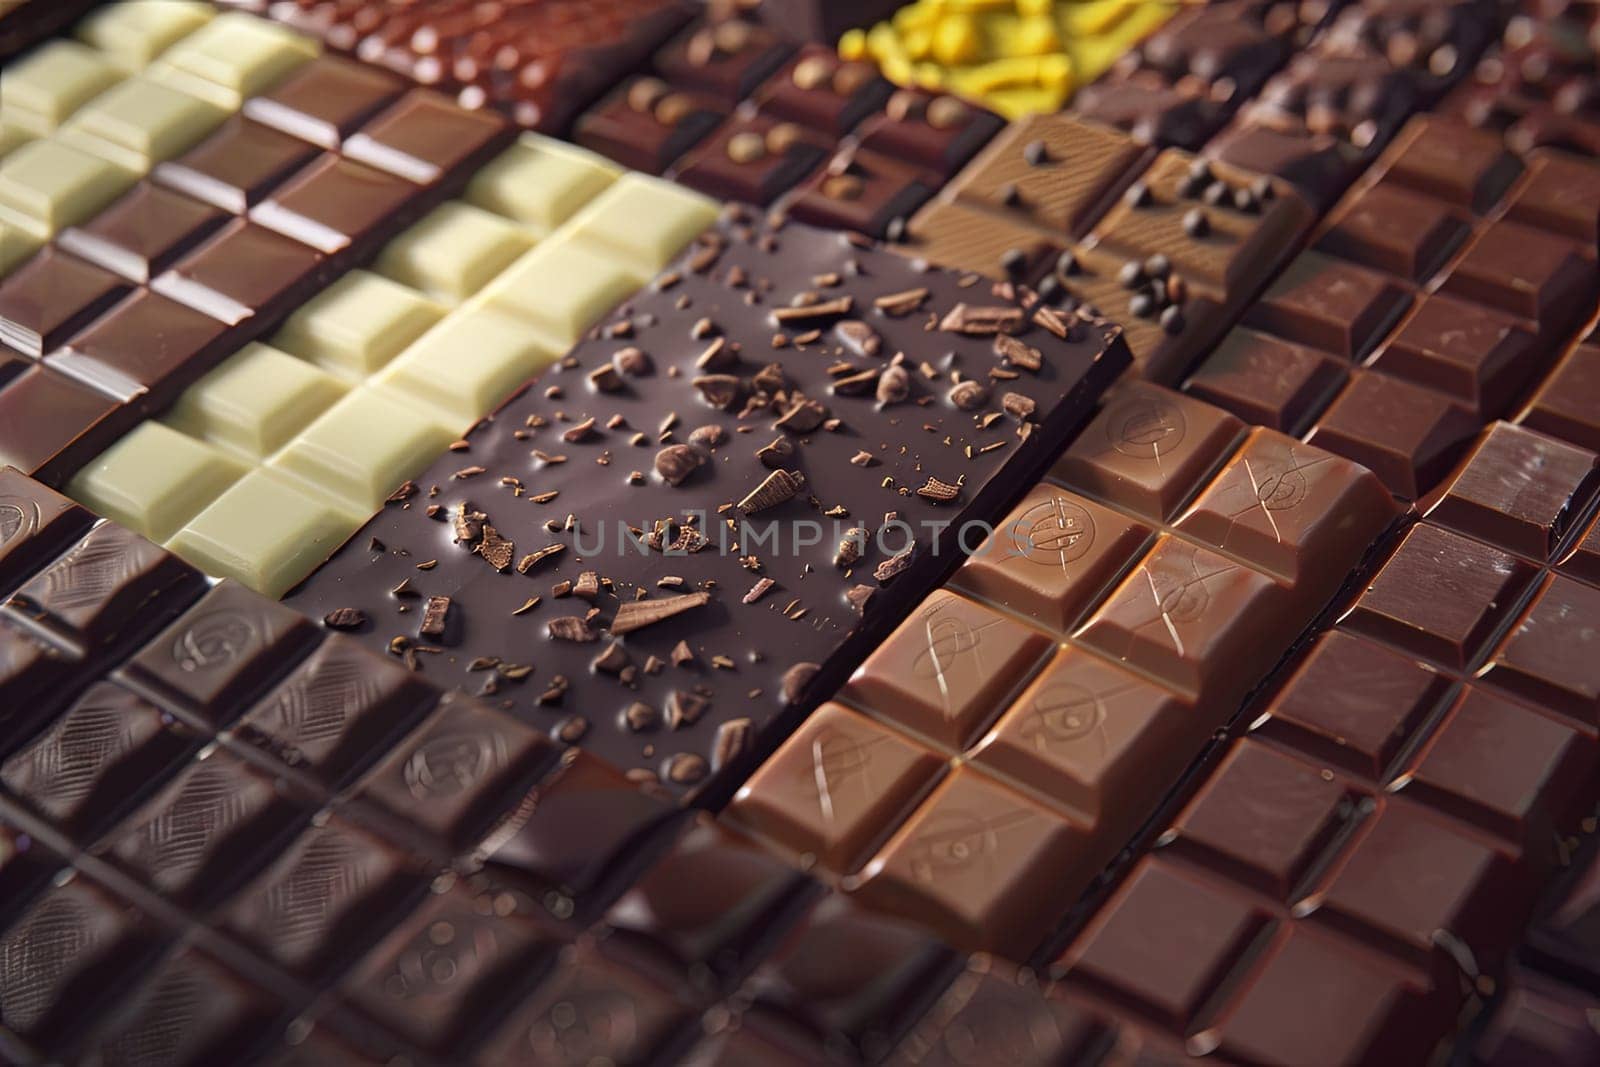 Detailed close-up of various chocolate bars neatly arranged, showcasing different flavors and types.